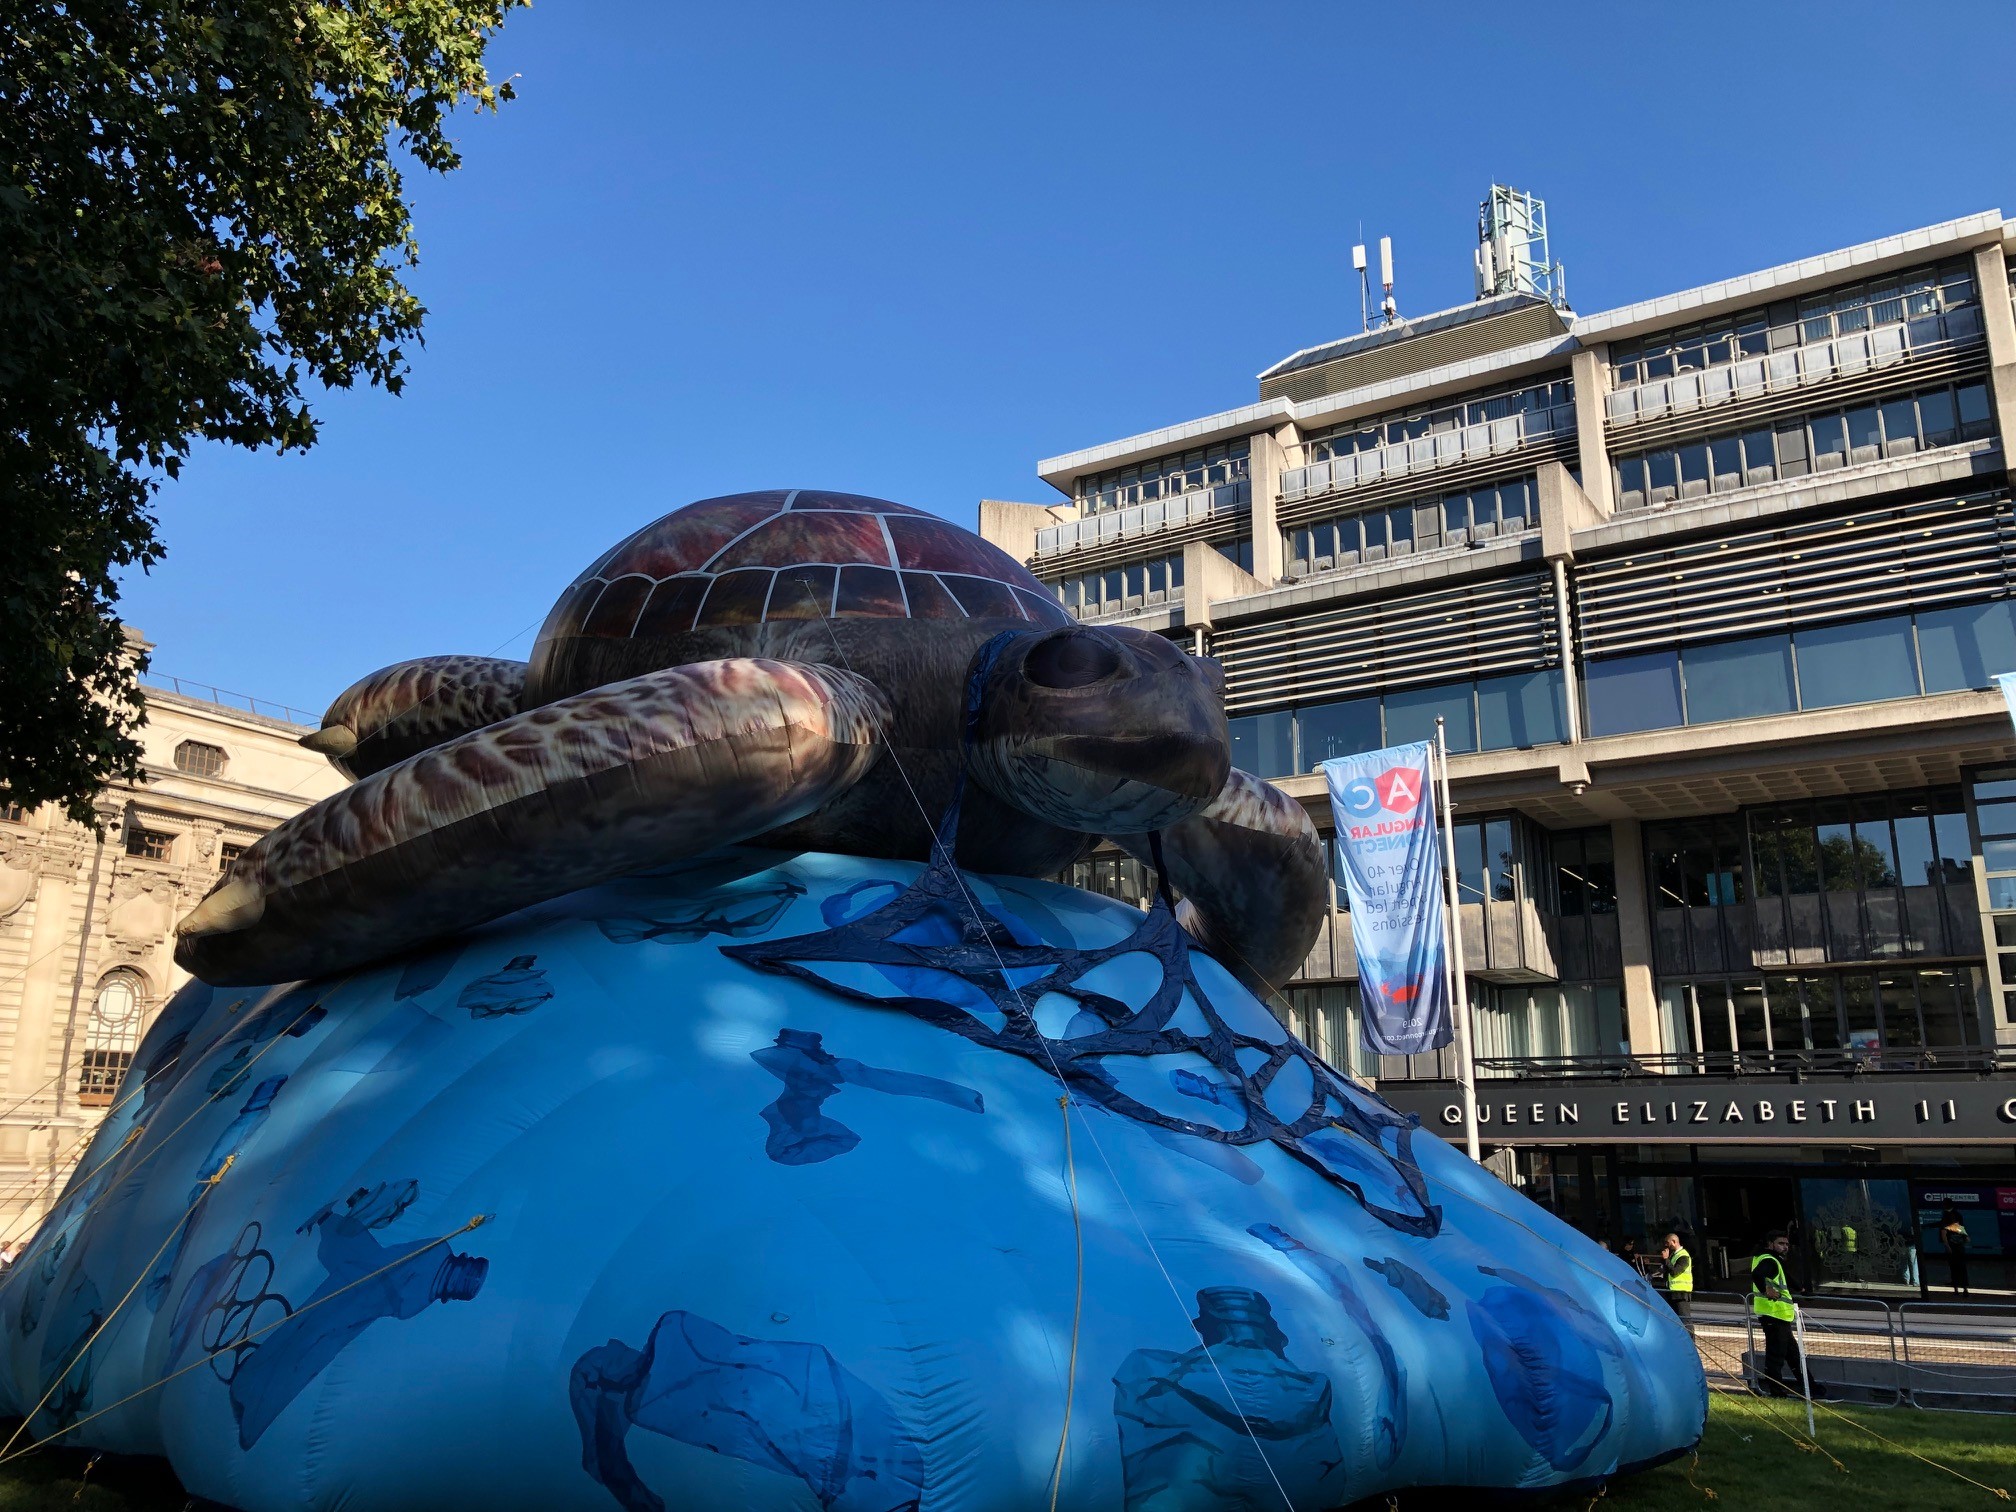 Giant Inflatable Turtle In London